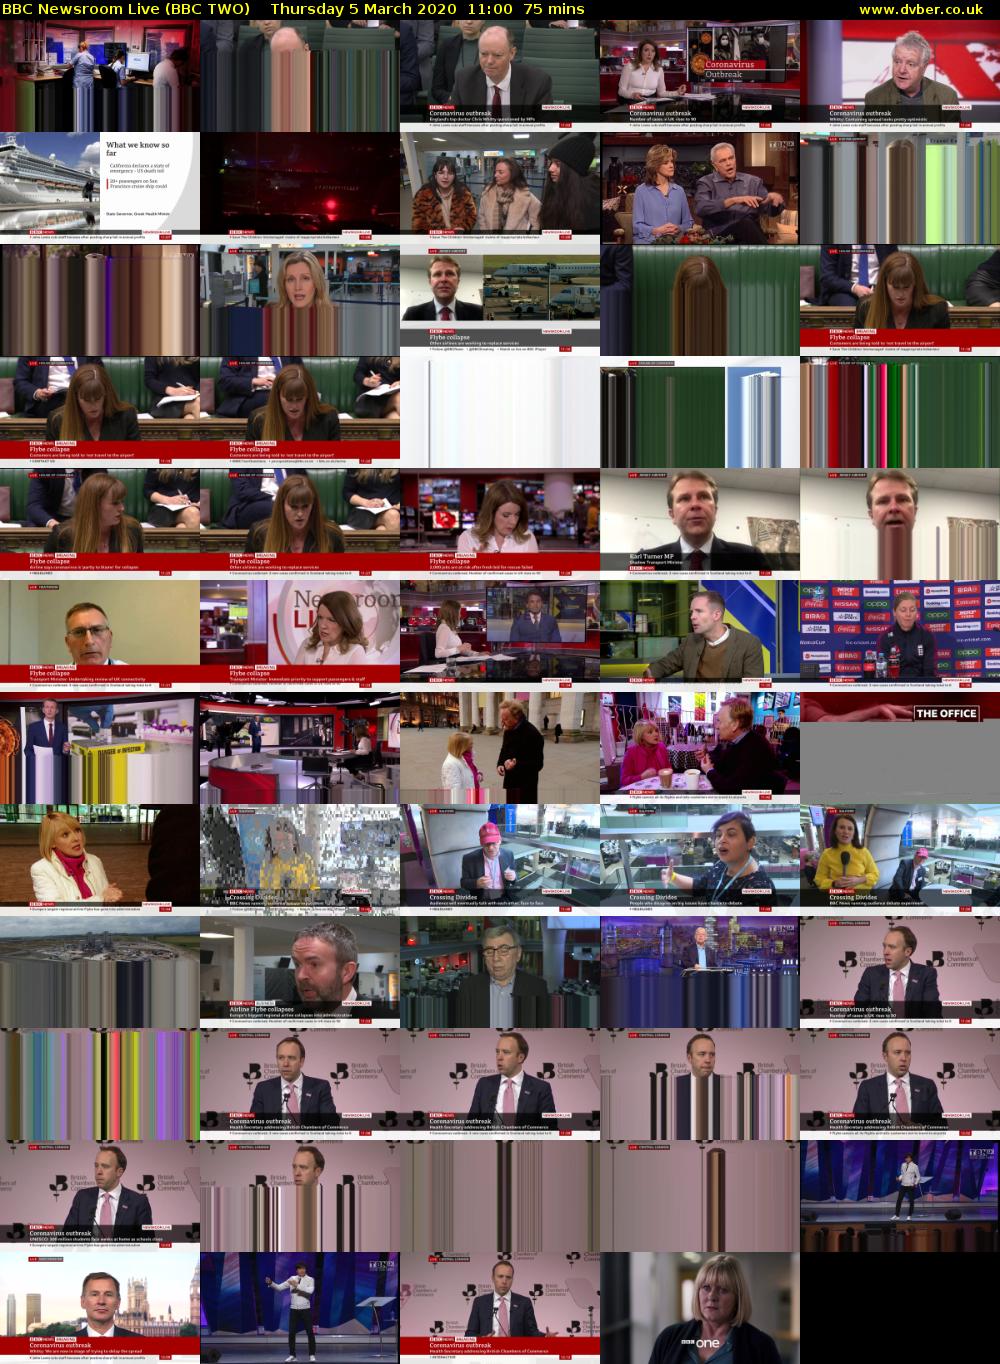 BBC Newsroom Live (BBC TWO) Thursday 5 March 2020 11:00 - 12:15